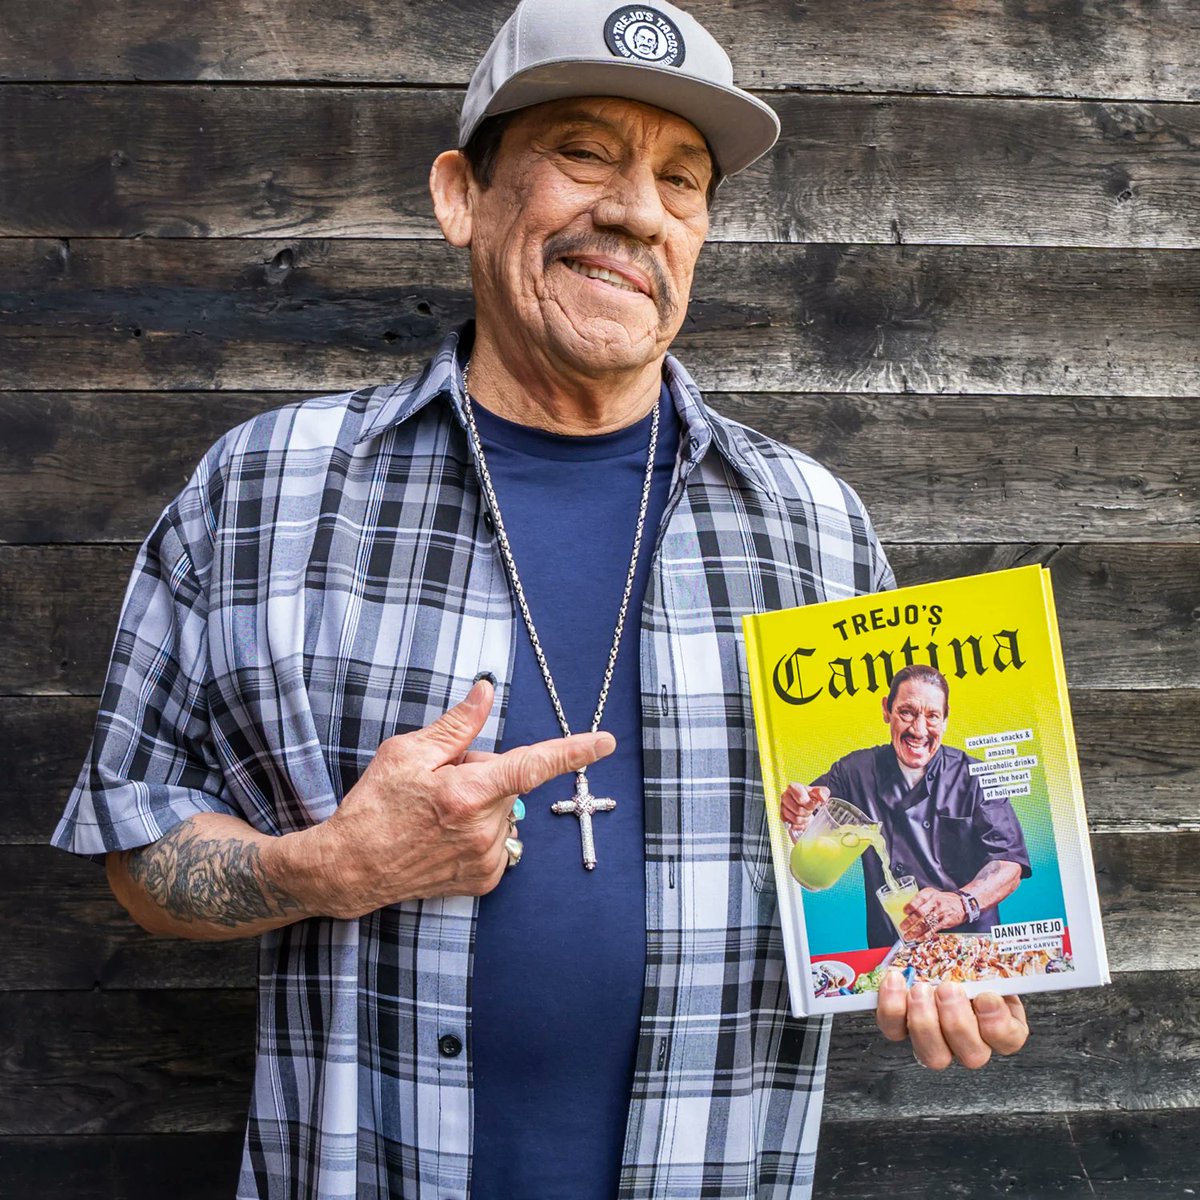 Enjoy your #NationalCocktailDay with my book Trejo's Cantina, full of amazing cocktail recipes and more! Don't have one? Get a hardback copy signed by me here: bit.ly/TrejosCantinaB…

#trejosspirits #trejostacos #cocktail #zeroproof